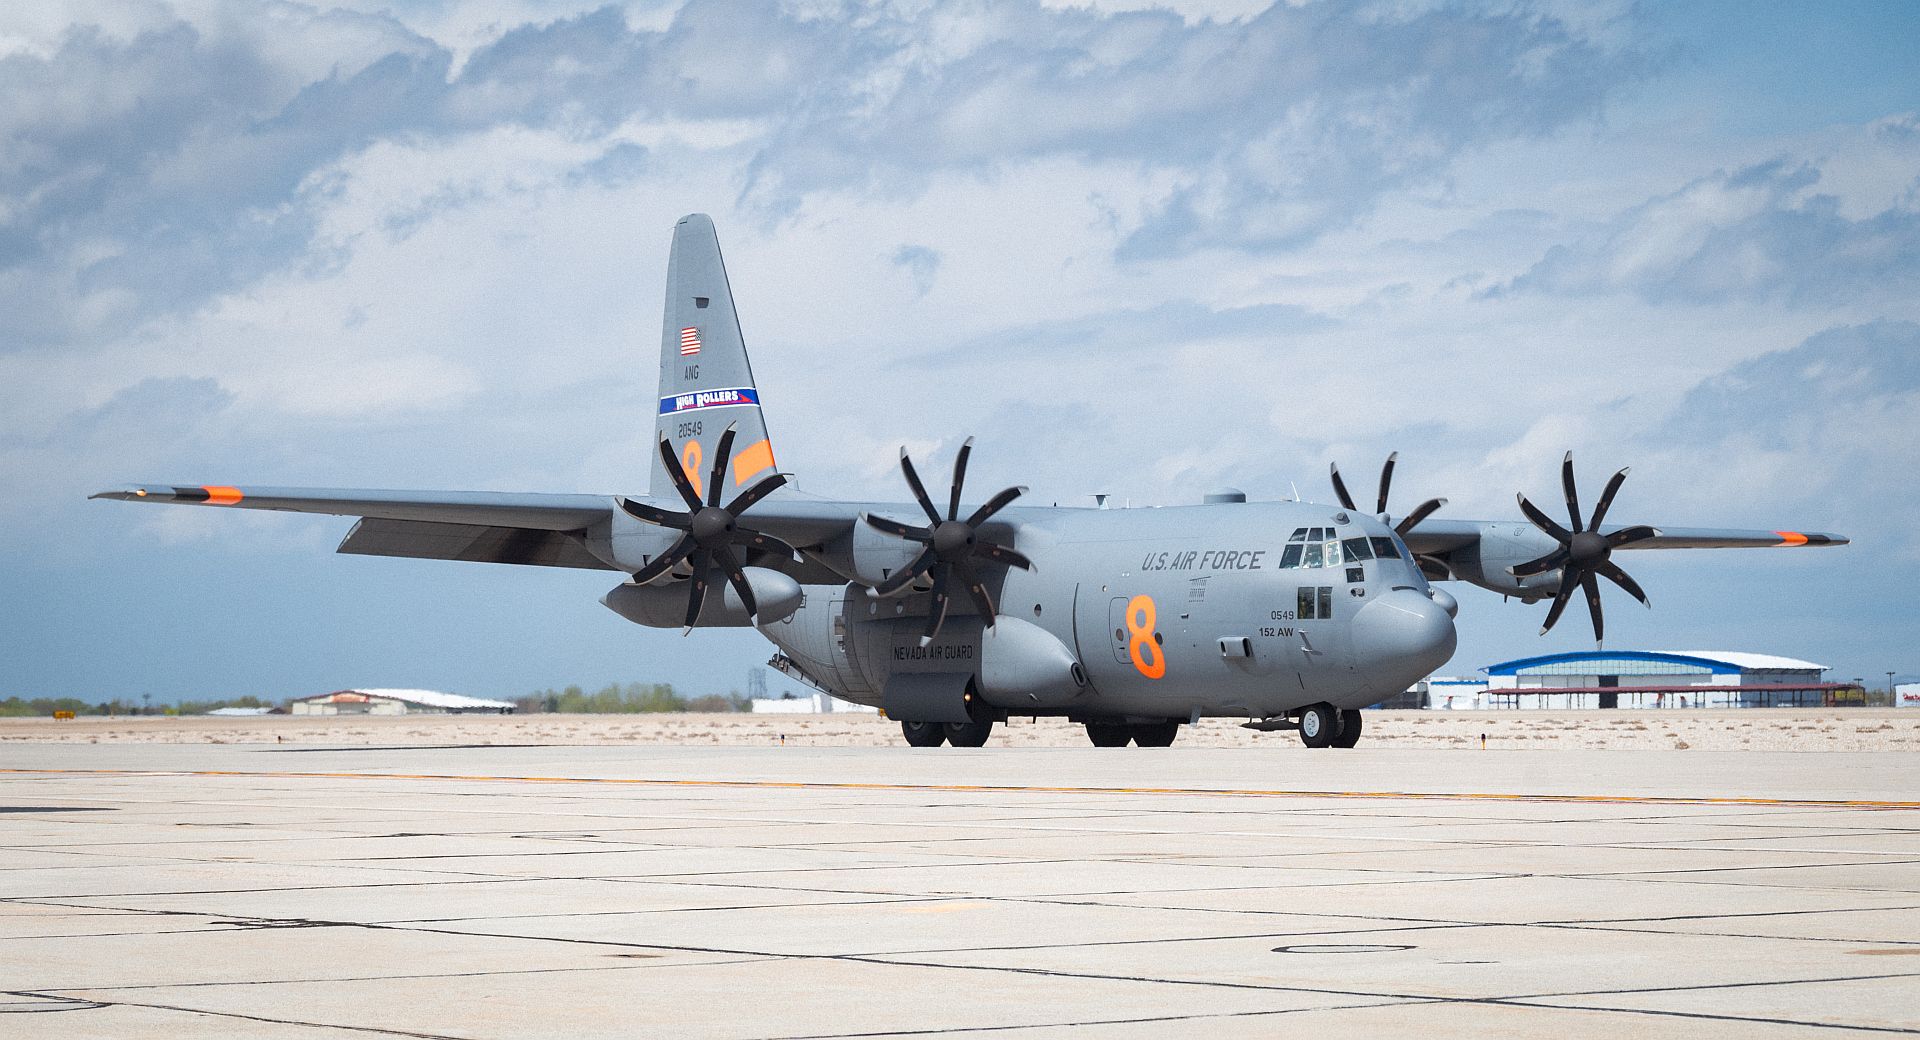 130H Hercules Aircraft From The 152rd Airlift Wing Nevada Air National Guard